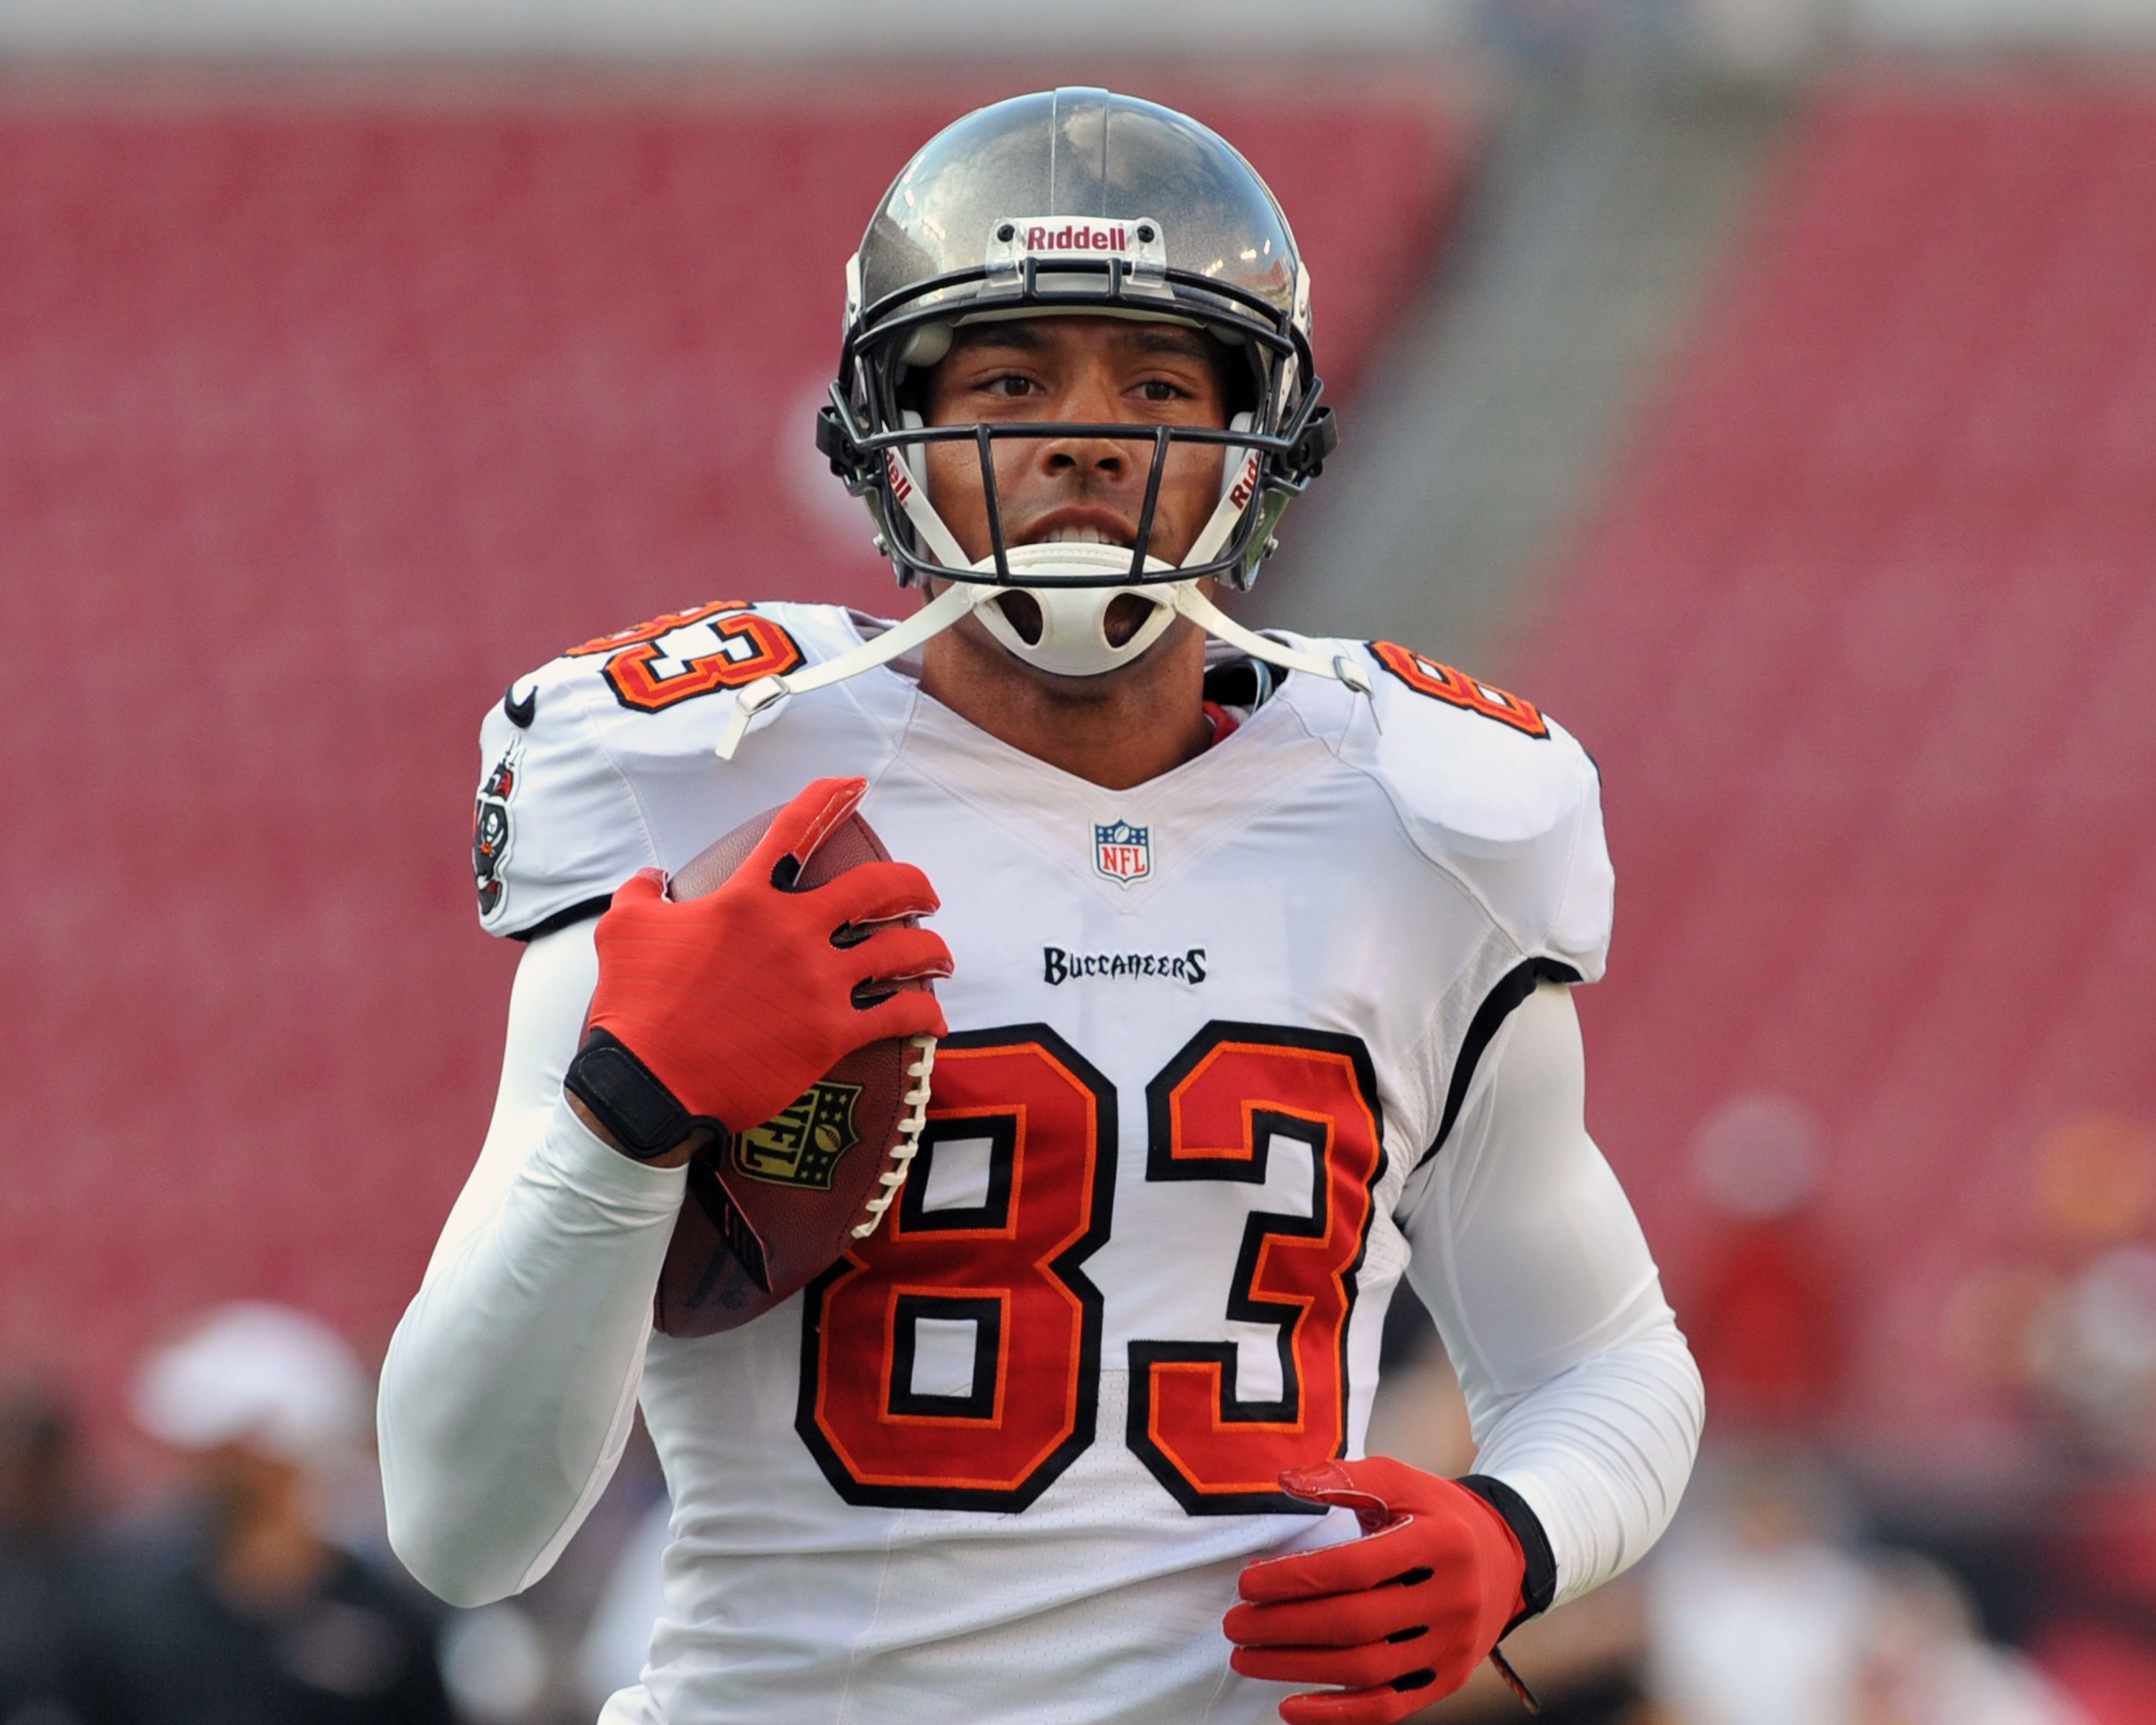 Vincent Jackson of the Tampa Bay Buccaneers warms up for a game against the Washington Redskins on August 29, 2013, in Tampa, Florida | Photo: Al Messerschmidt/Getty Images